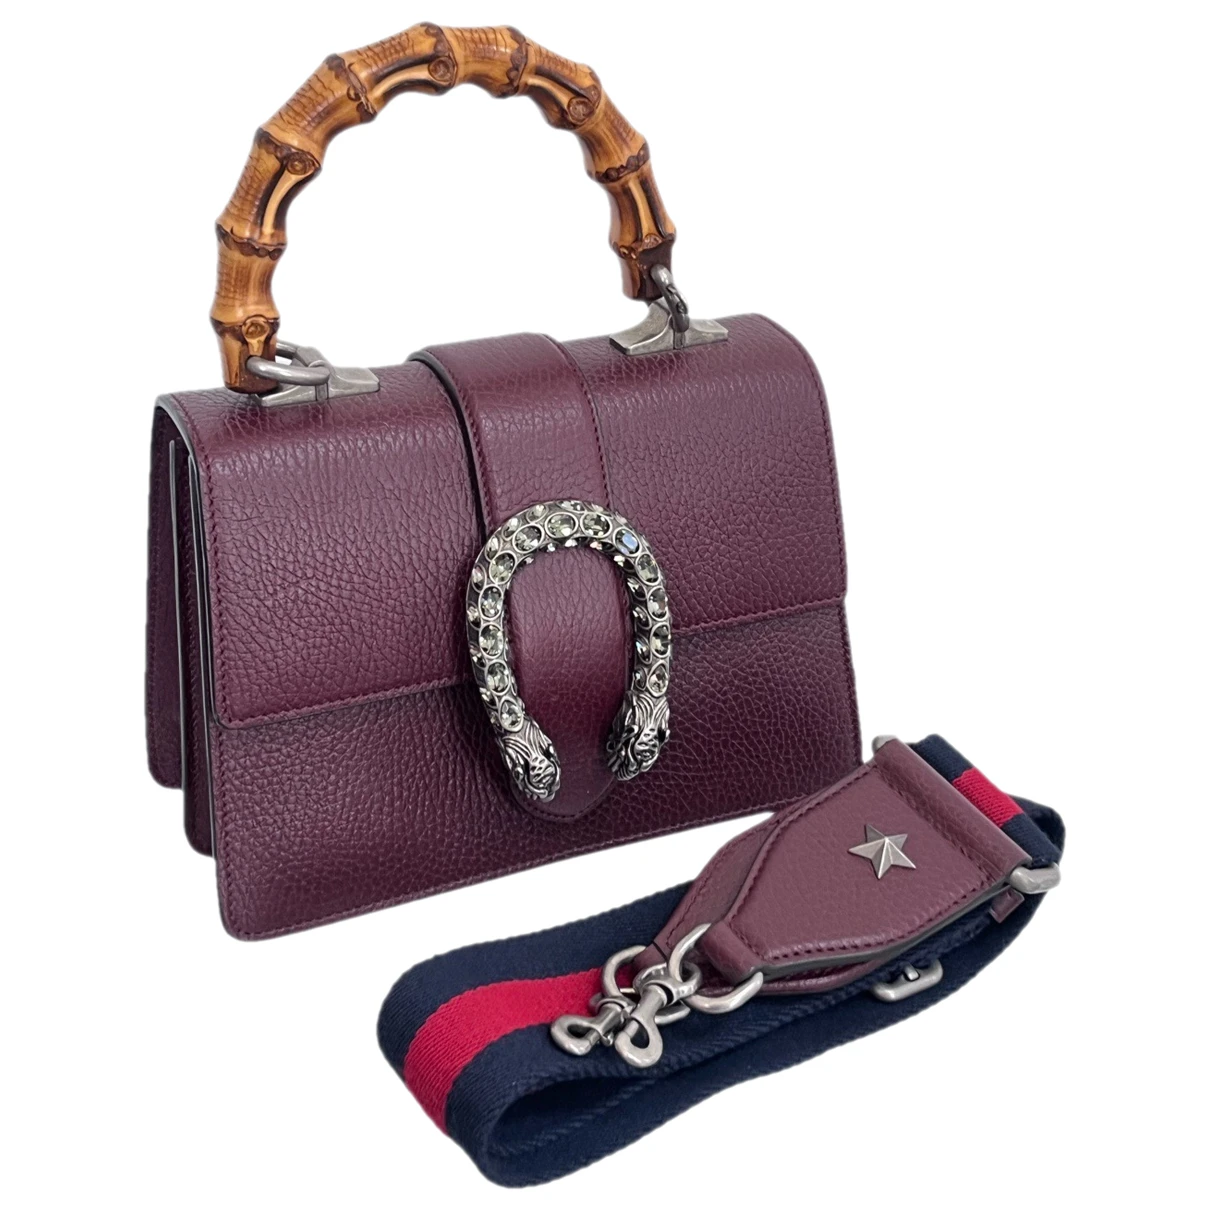 Pre-owned Gucci Dionysus Bamboo Leather Handbag In Burgundy